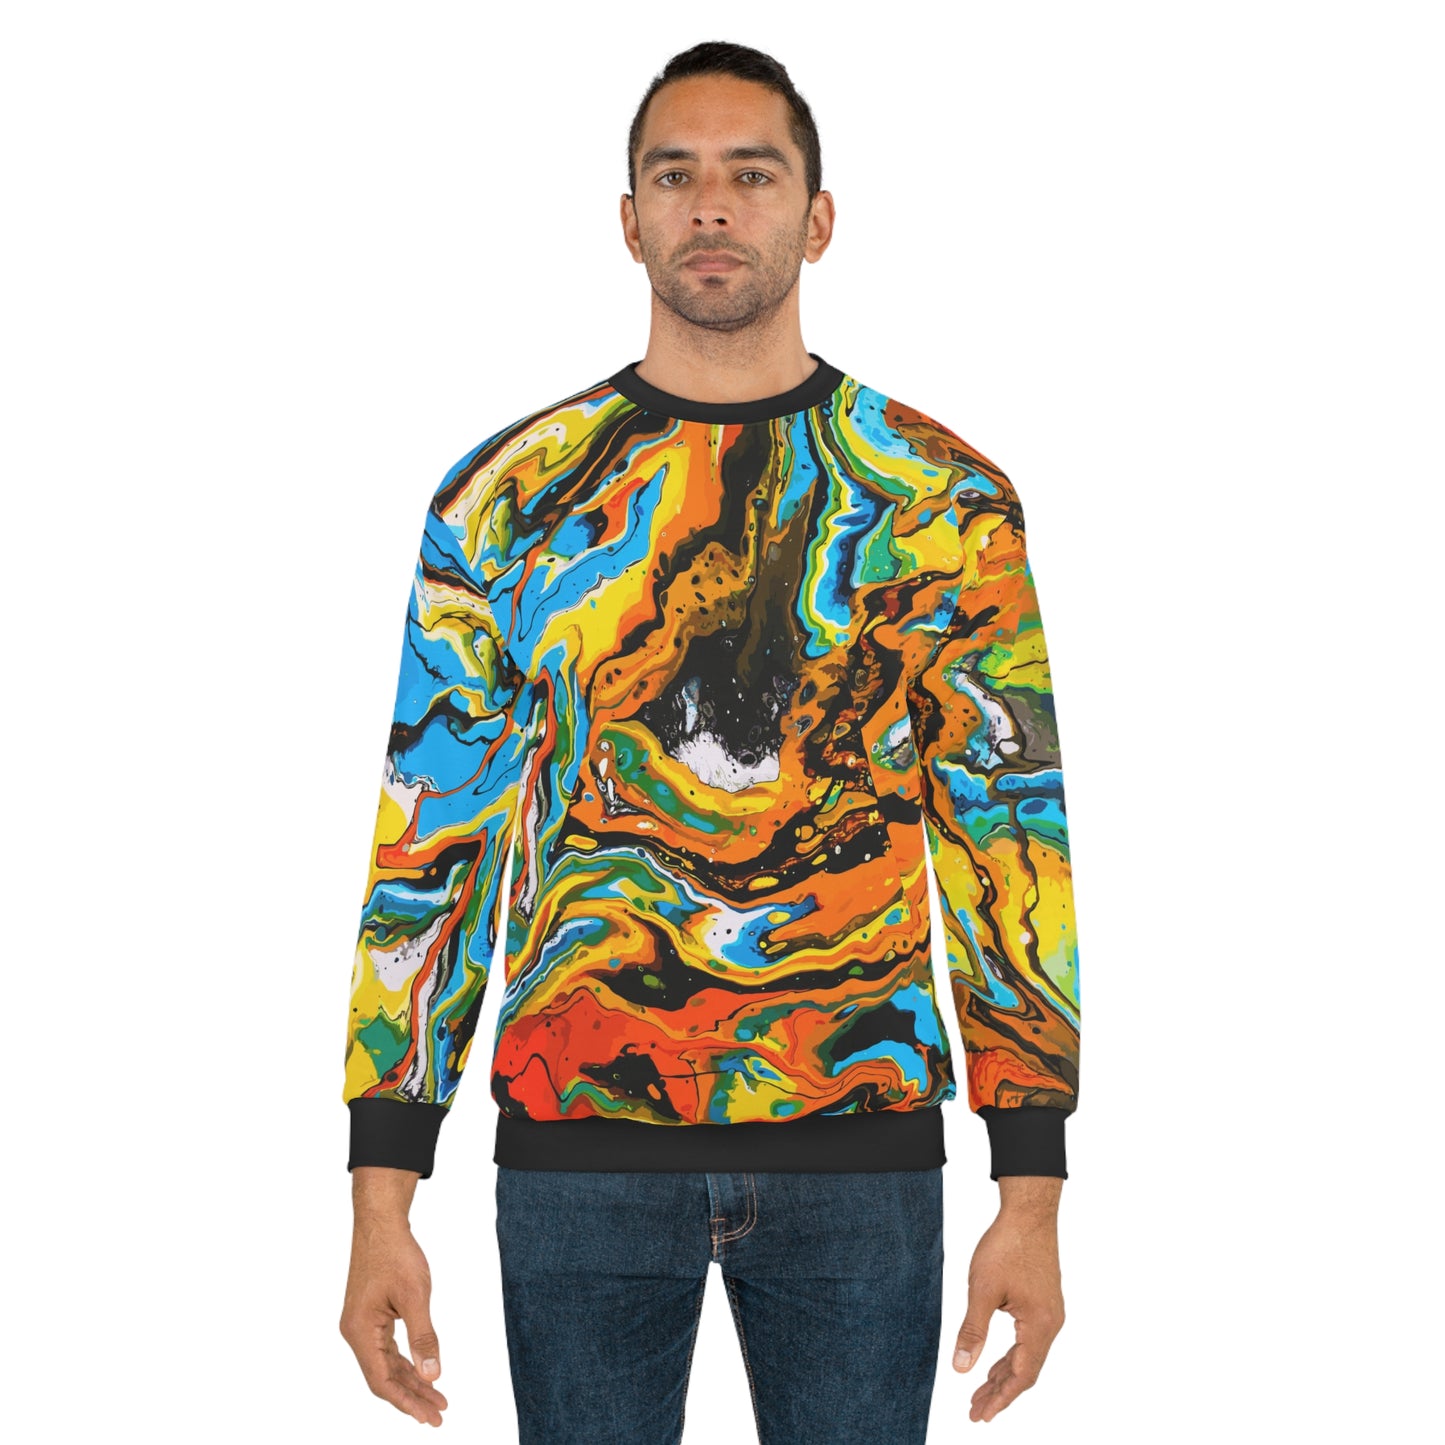 Sunset in Troubled Waters: All-Over Print Unisex Sweatshirt